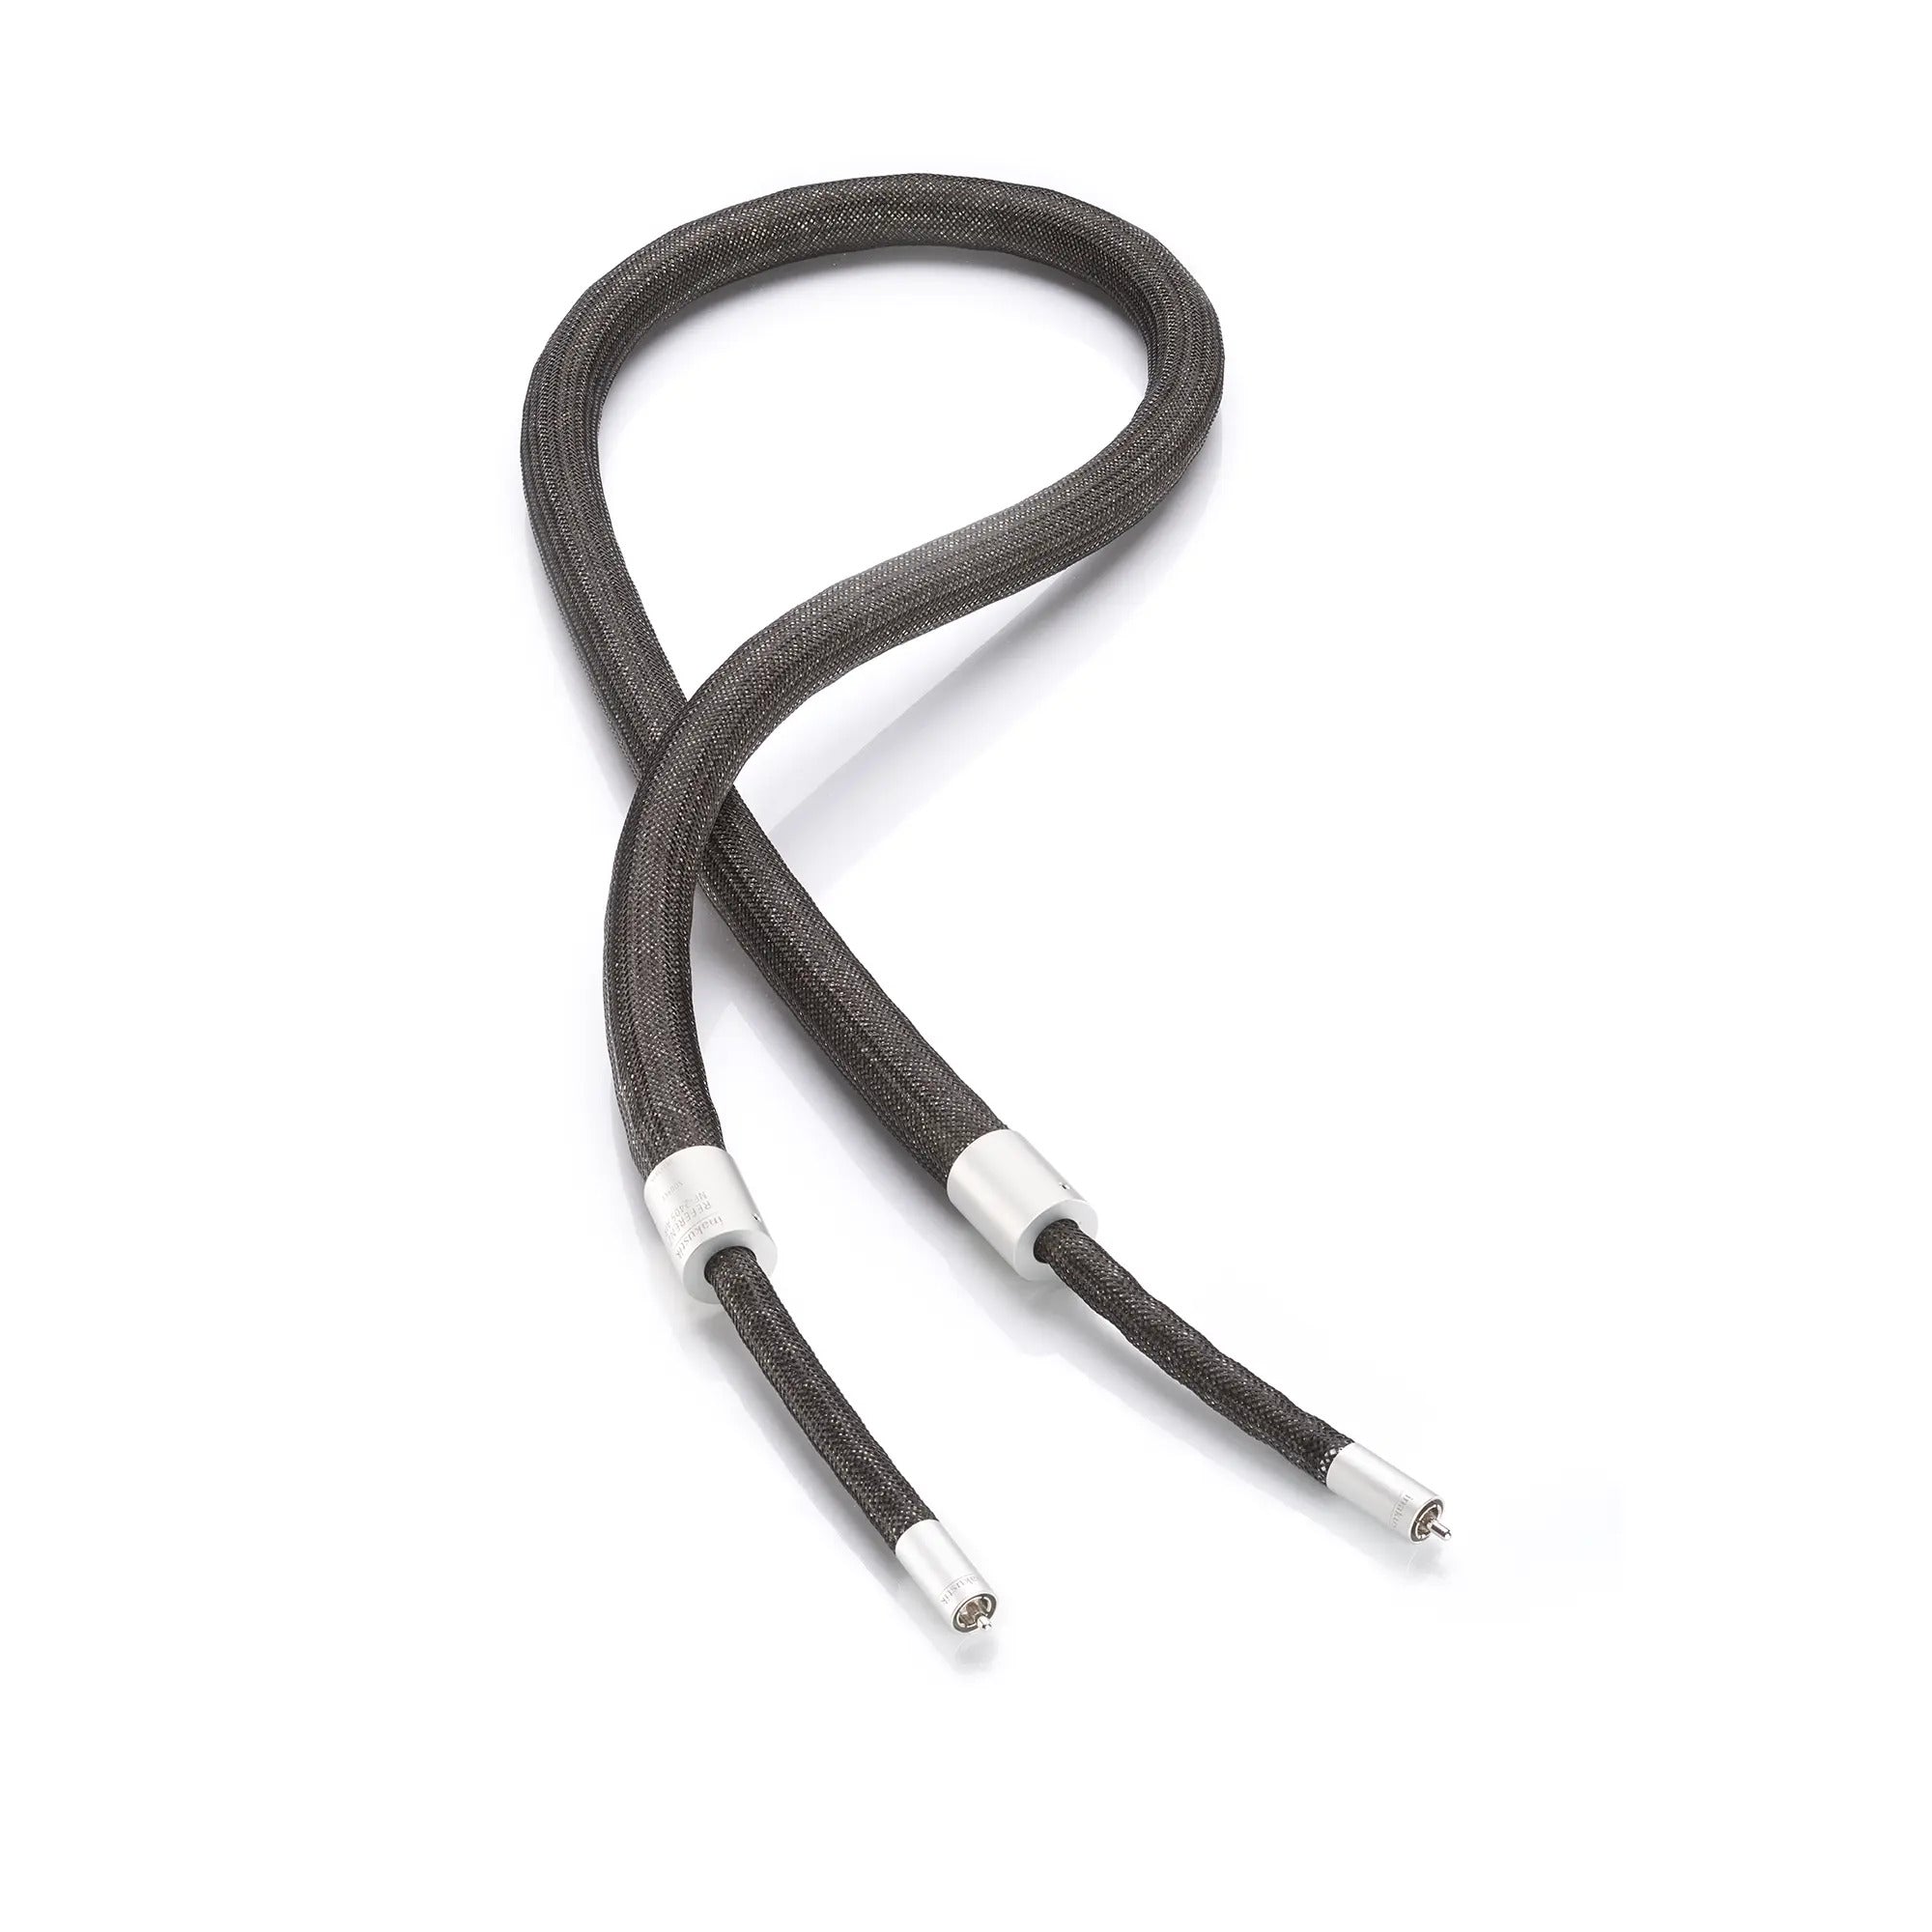 Inakustik Referenz NF-2405 AIR RCA Interconnect Cable